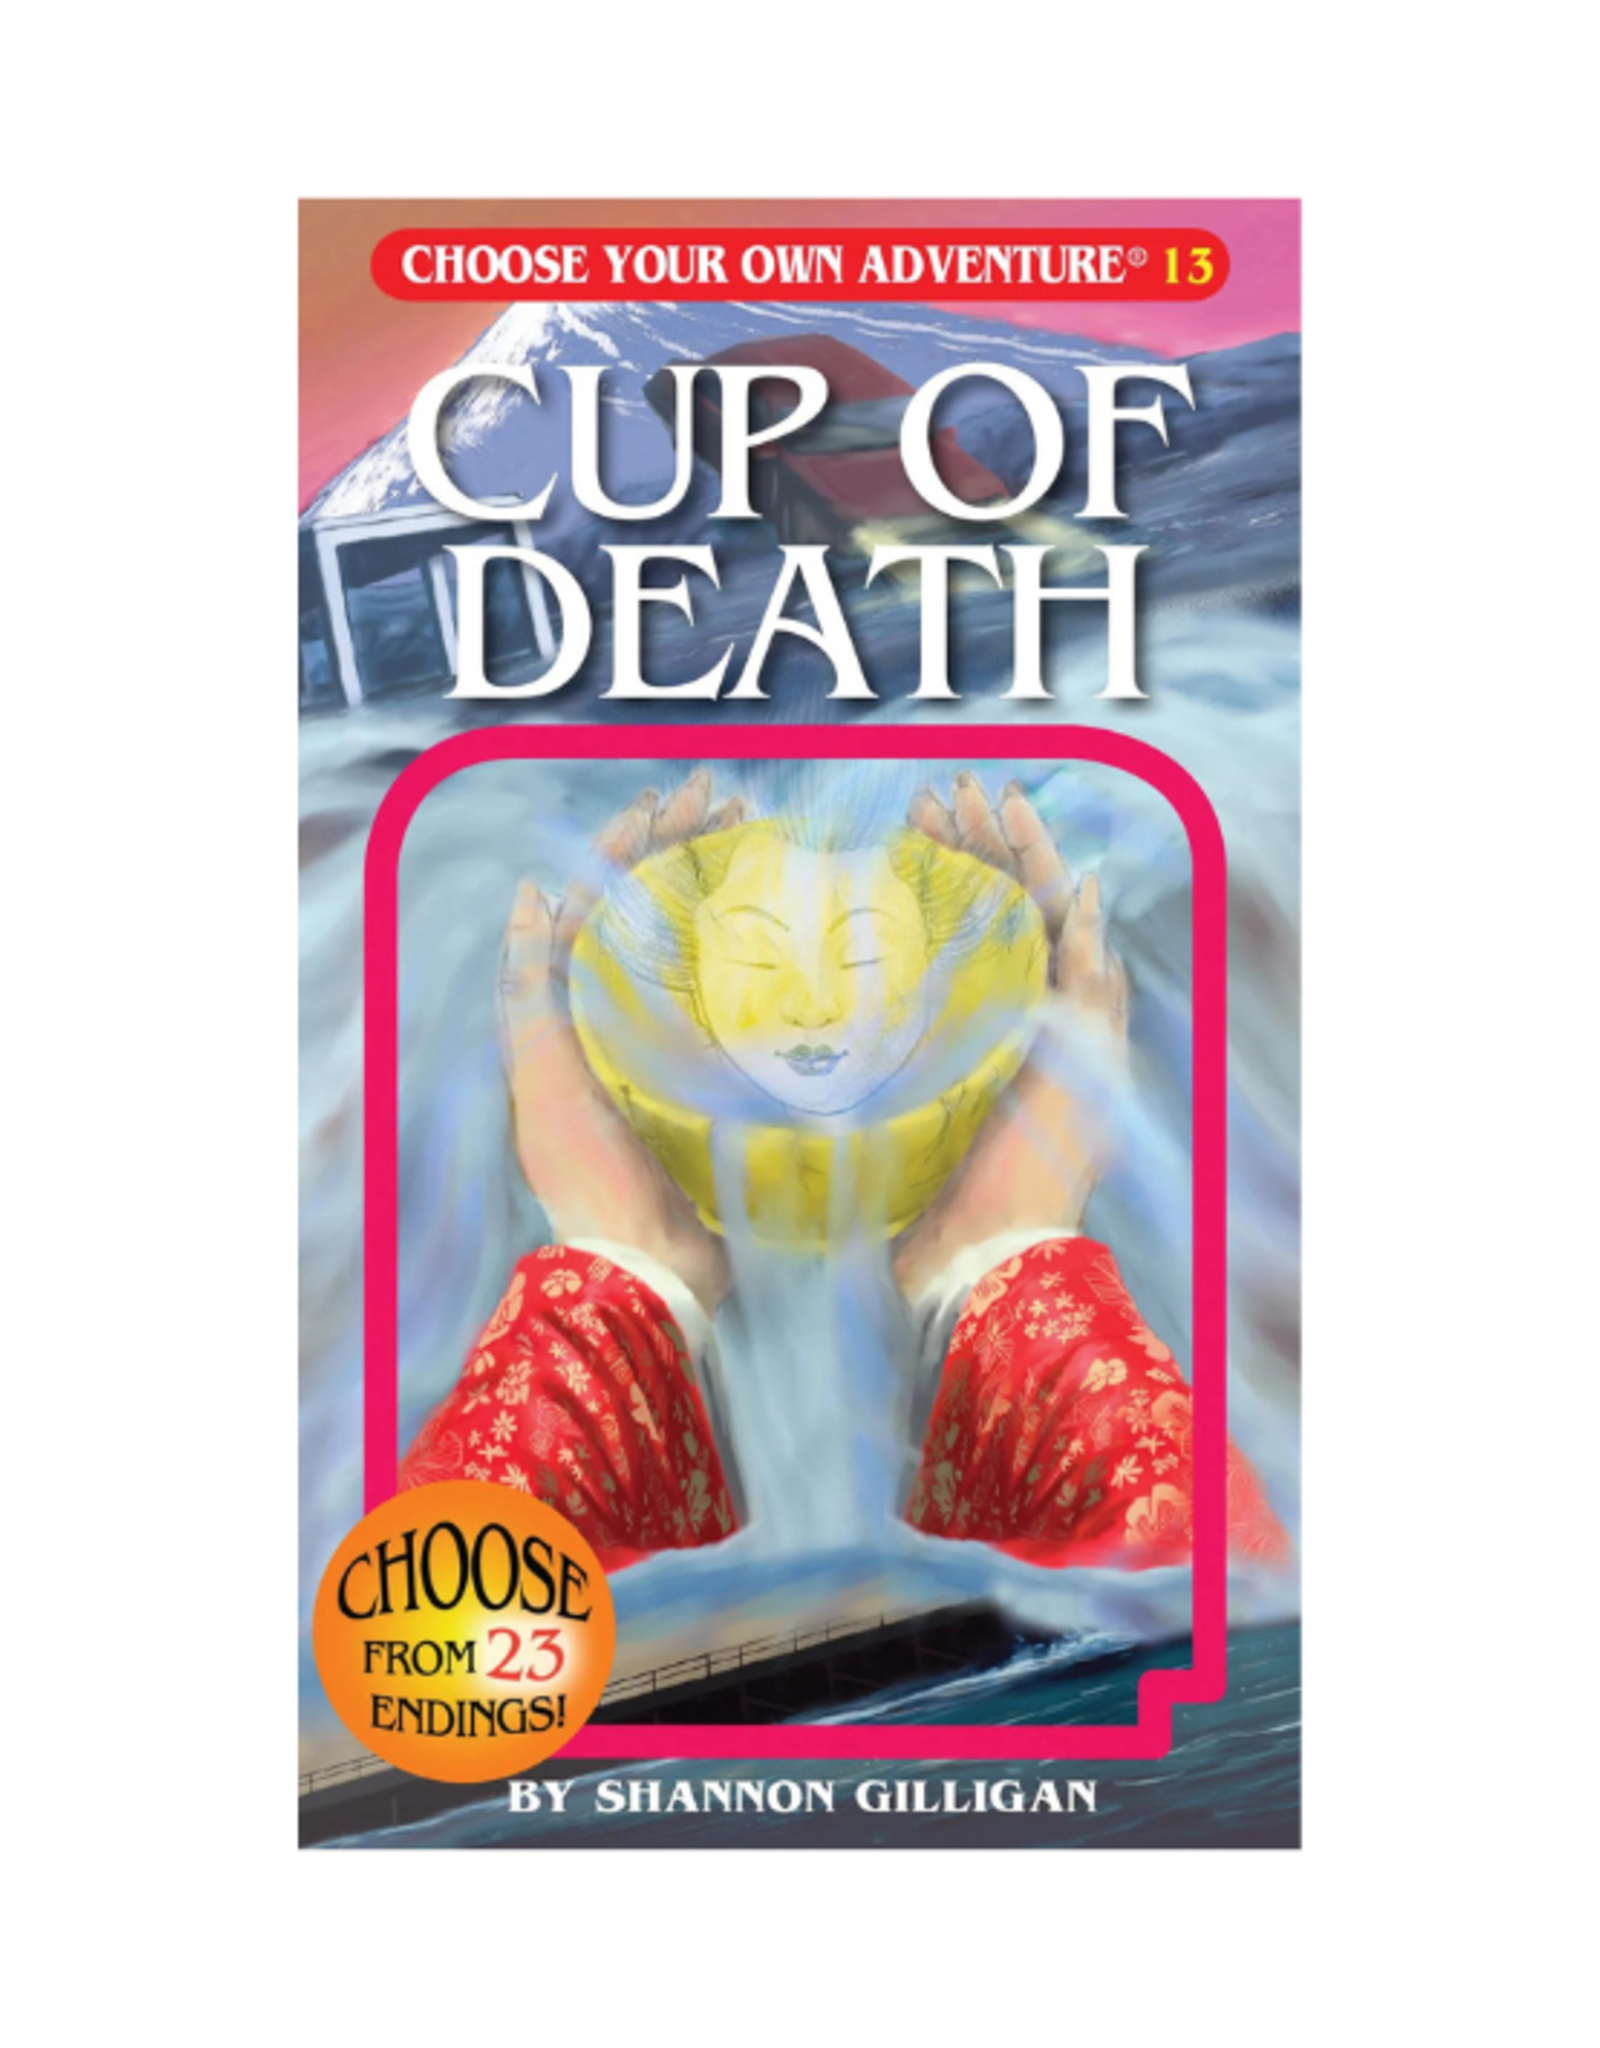 Choose Your Own Adventure Book - Choose Your Own Adventure - Cup of Death